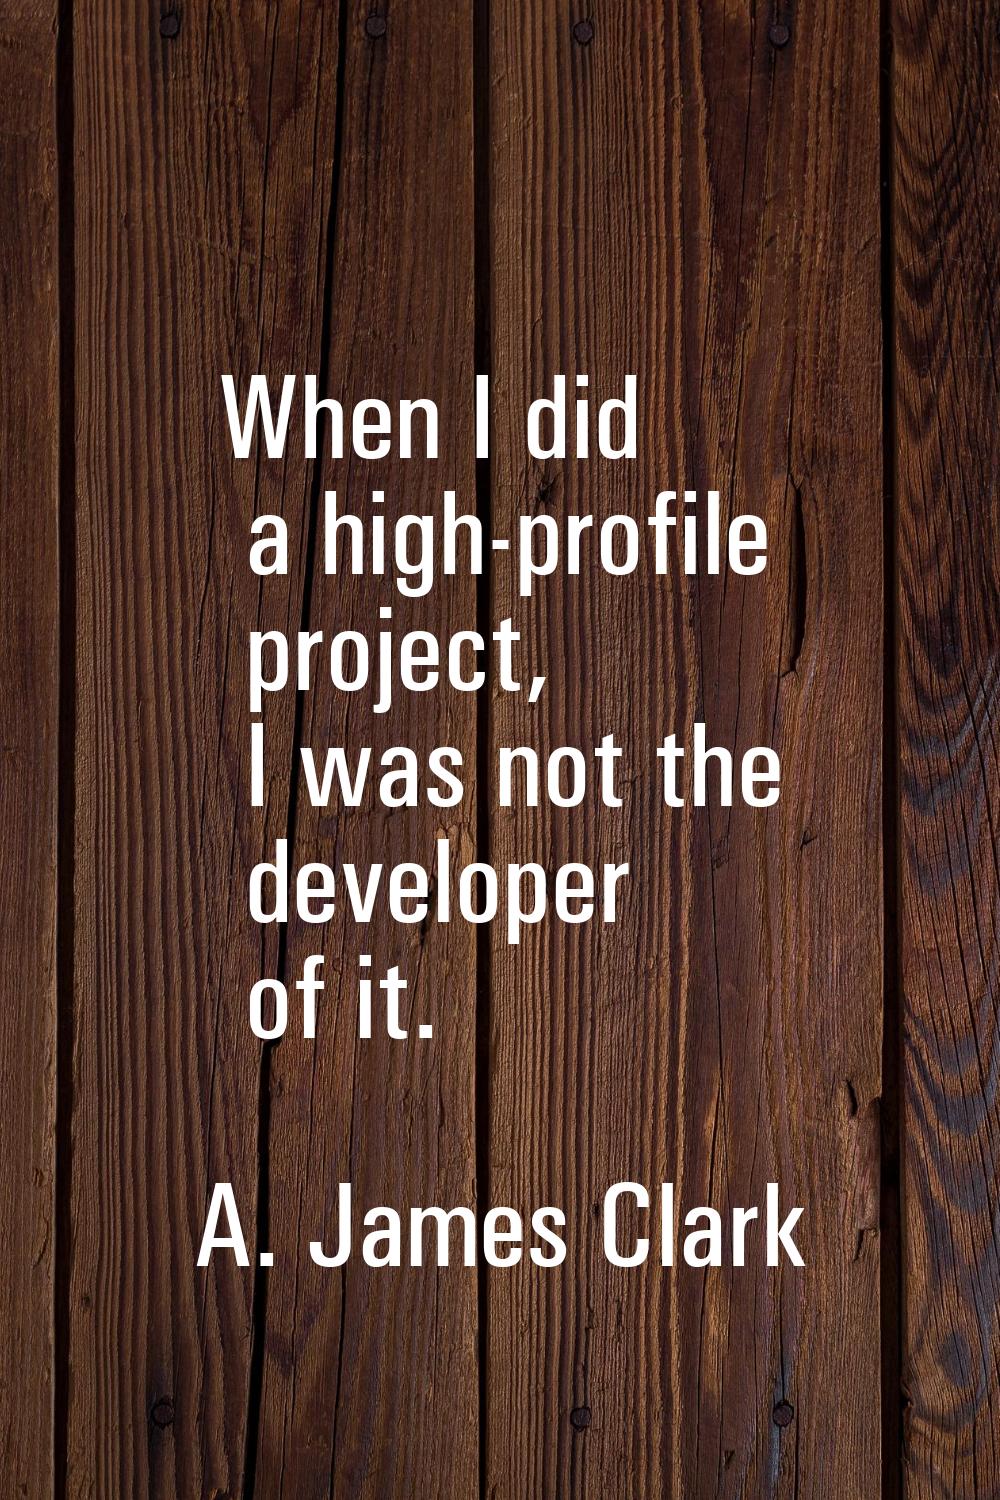 When I did a high-profile project, I was not the developer of it.